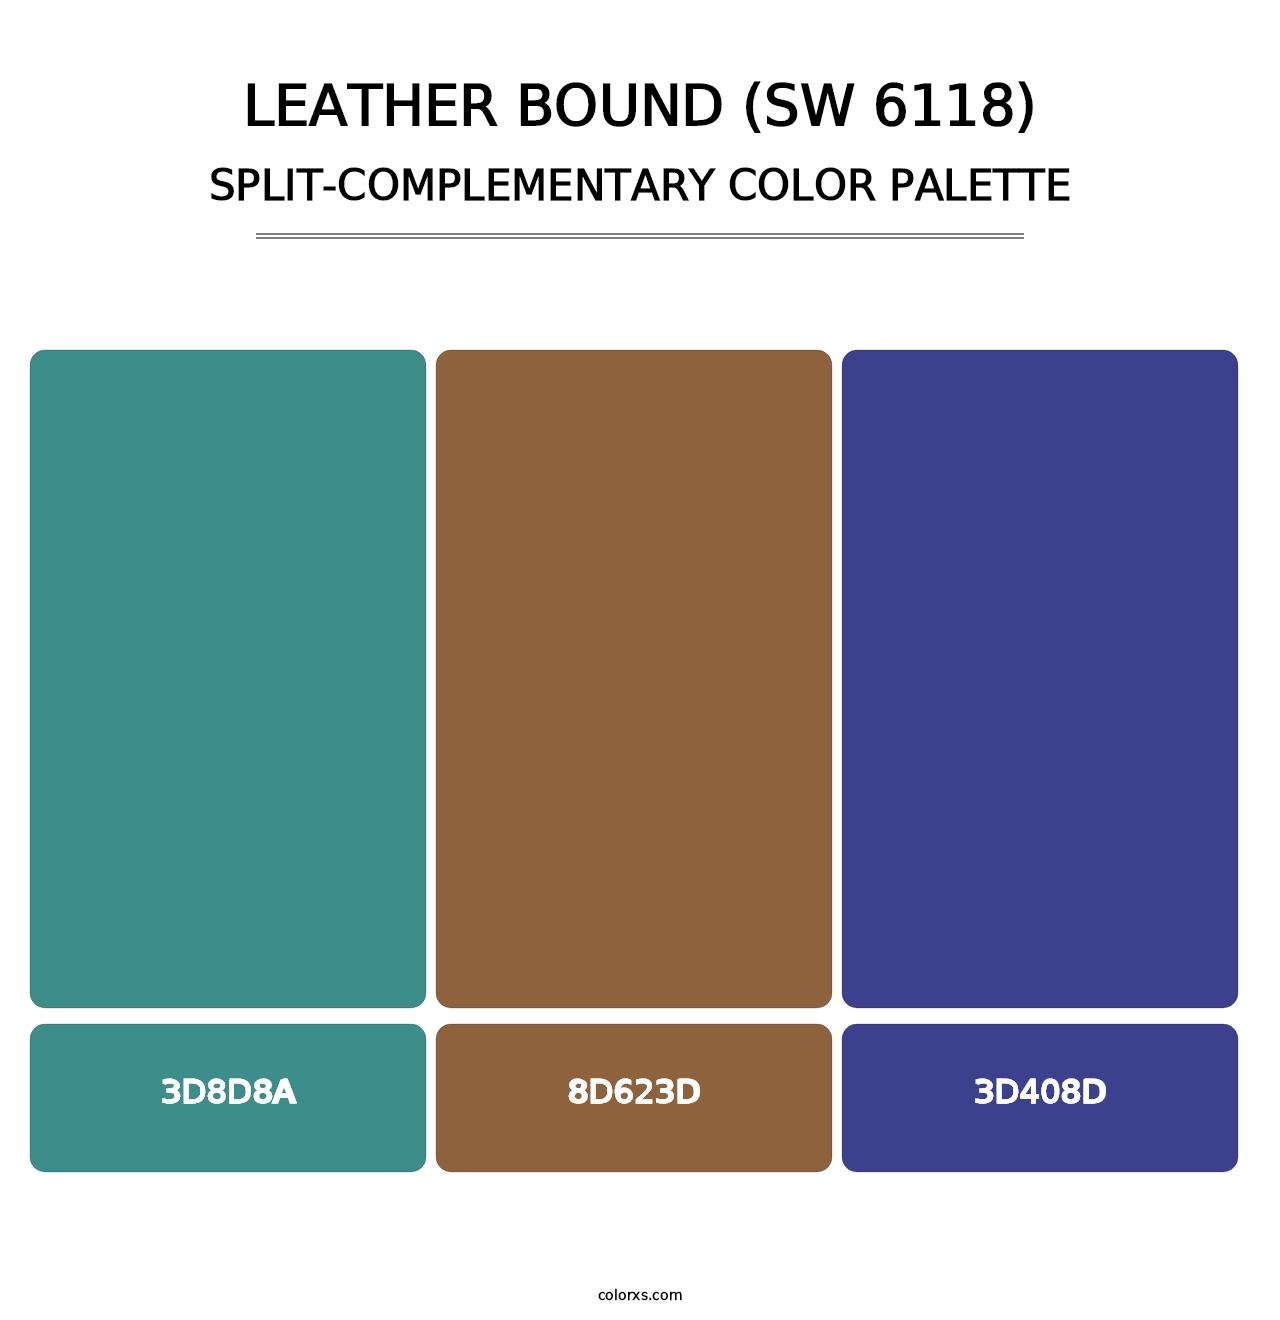 Leather Bound (SW 6118) - Split-Complementary Color Palette